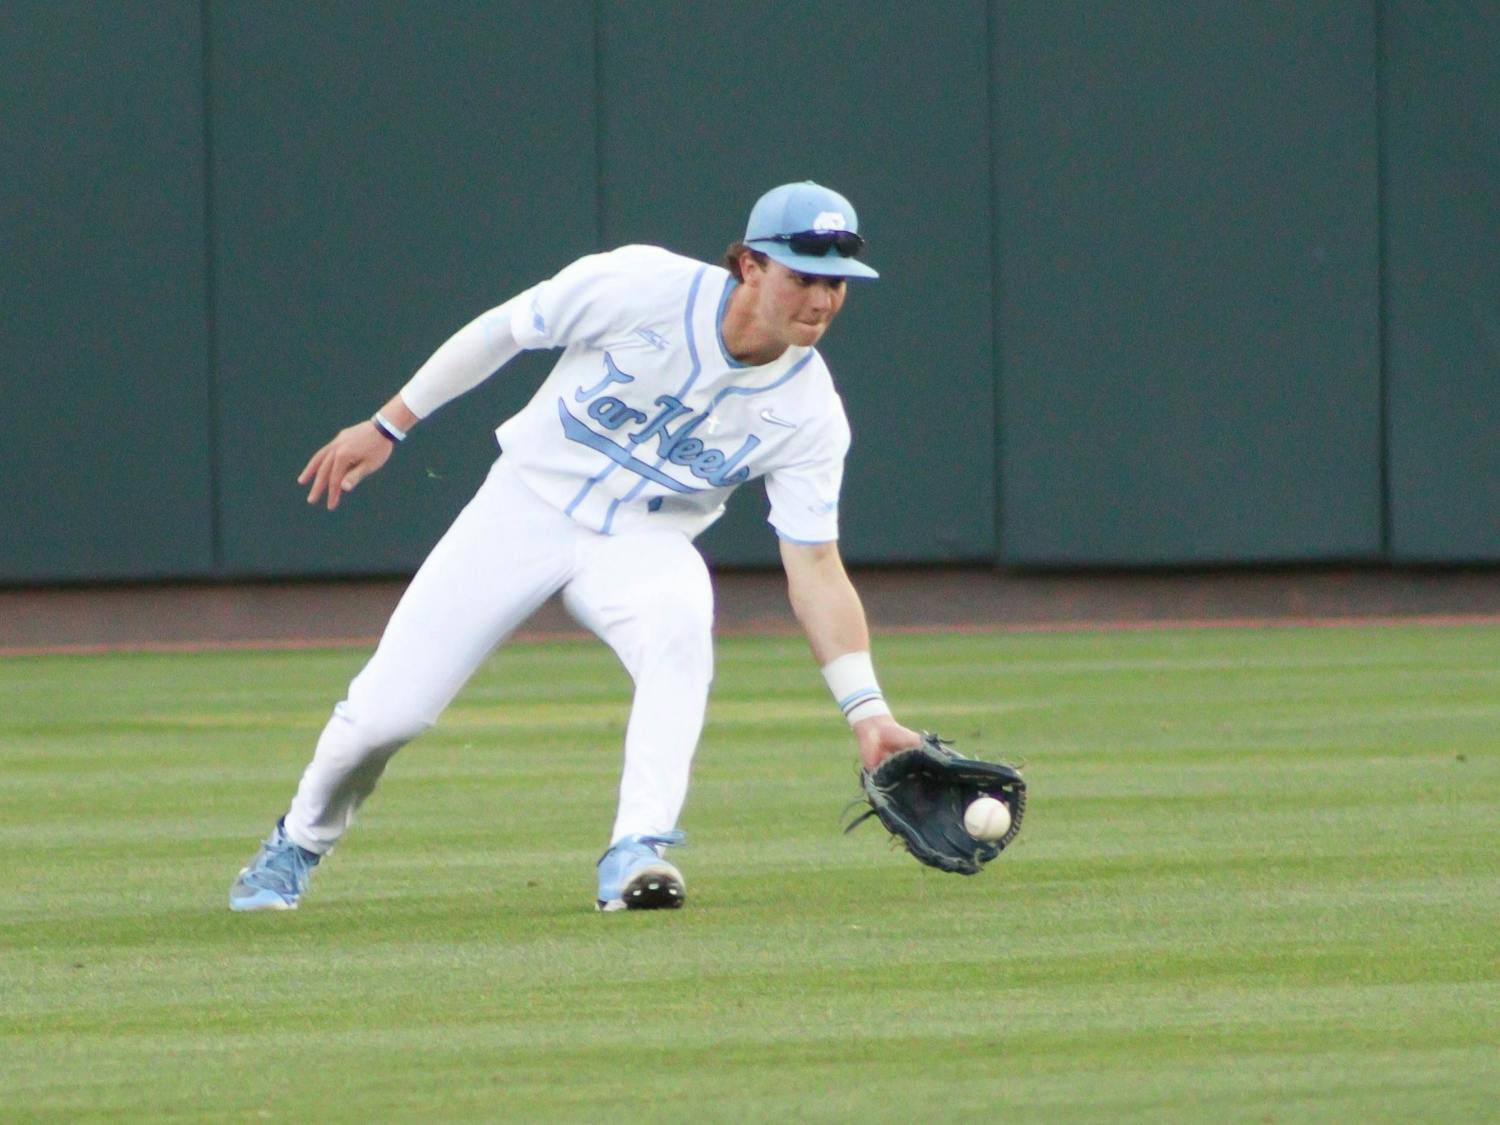 Outfielder Vance Honeycutt (7) goes to field a groundball during a baseball game against North Carolina A&T. UNC lost 6-7 at home on Tuesday, April 12, 2022.